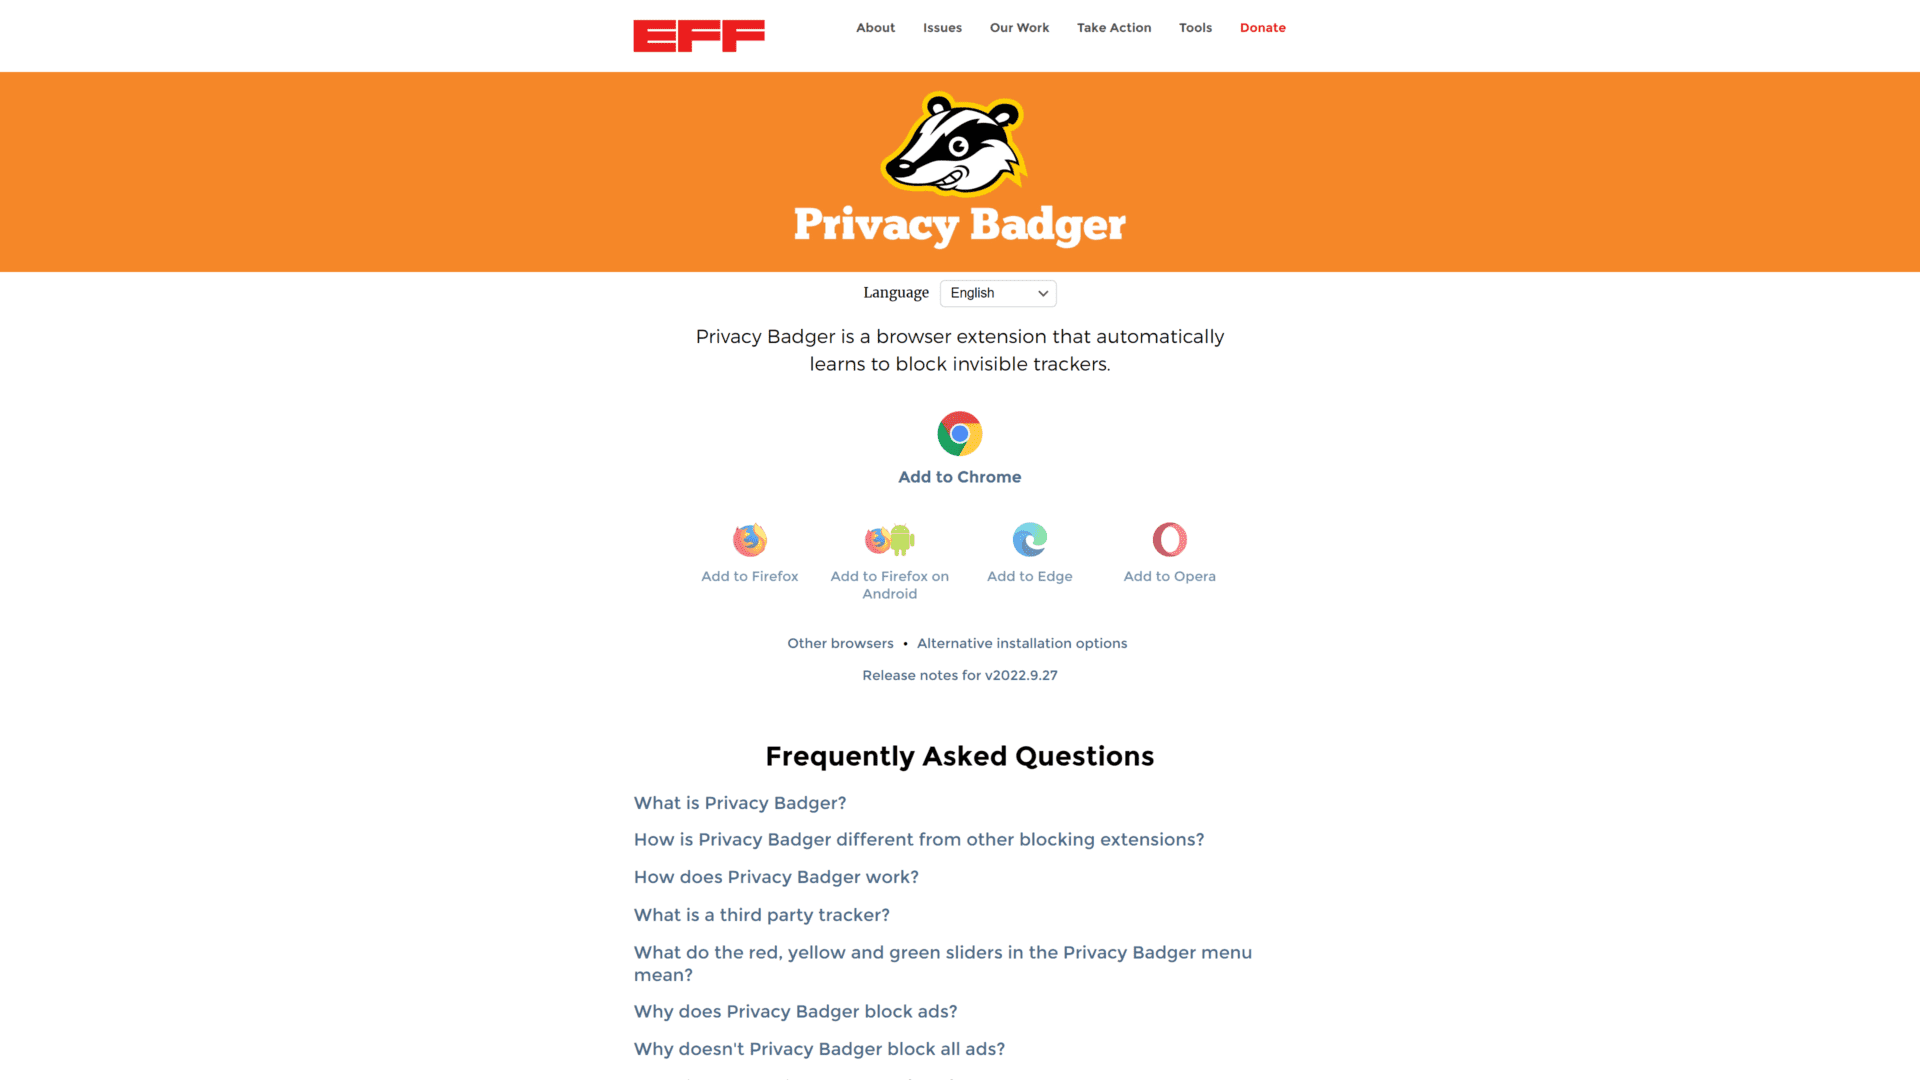 A screenshot of the privacy badger homepage